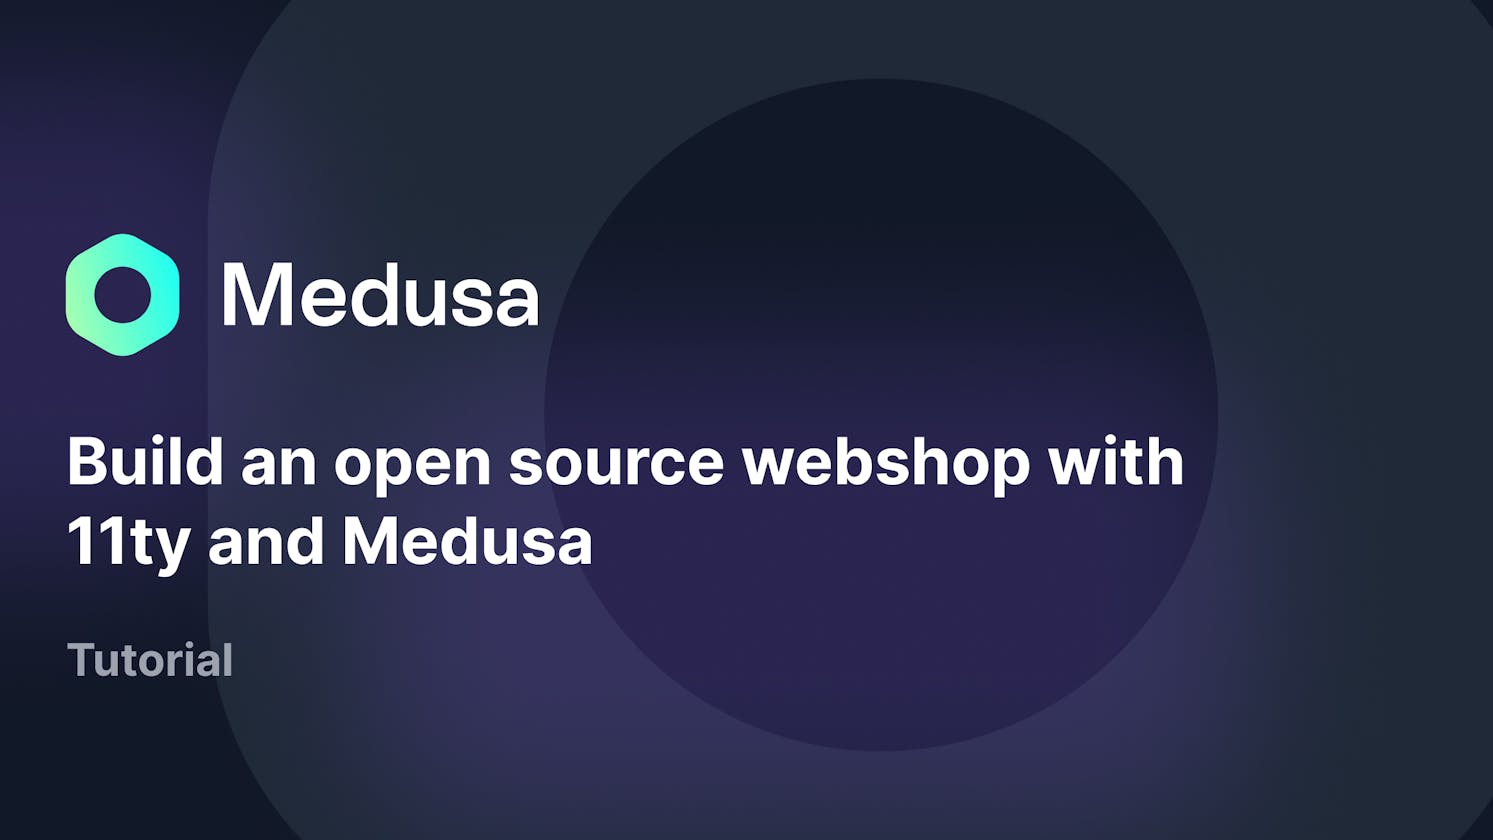 Build an open source webshop with 11ty and Medusa